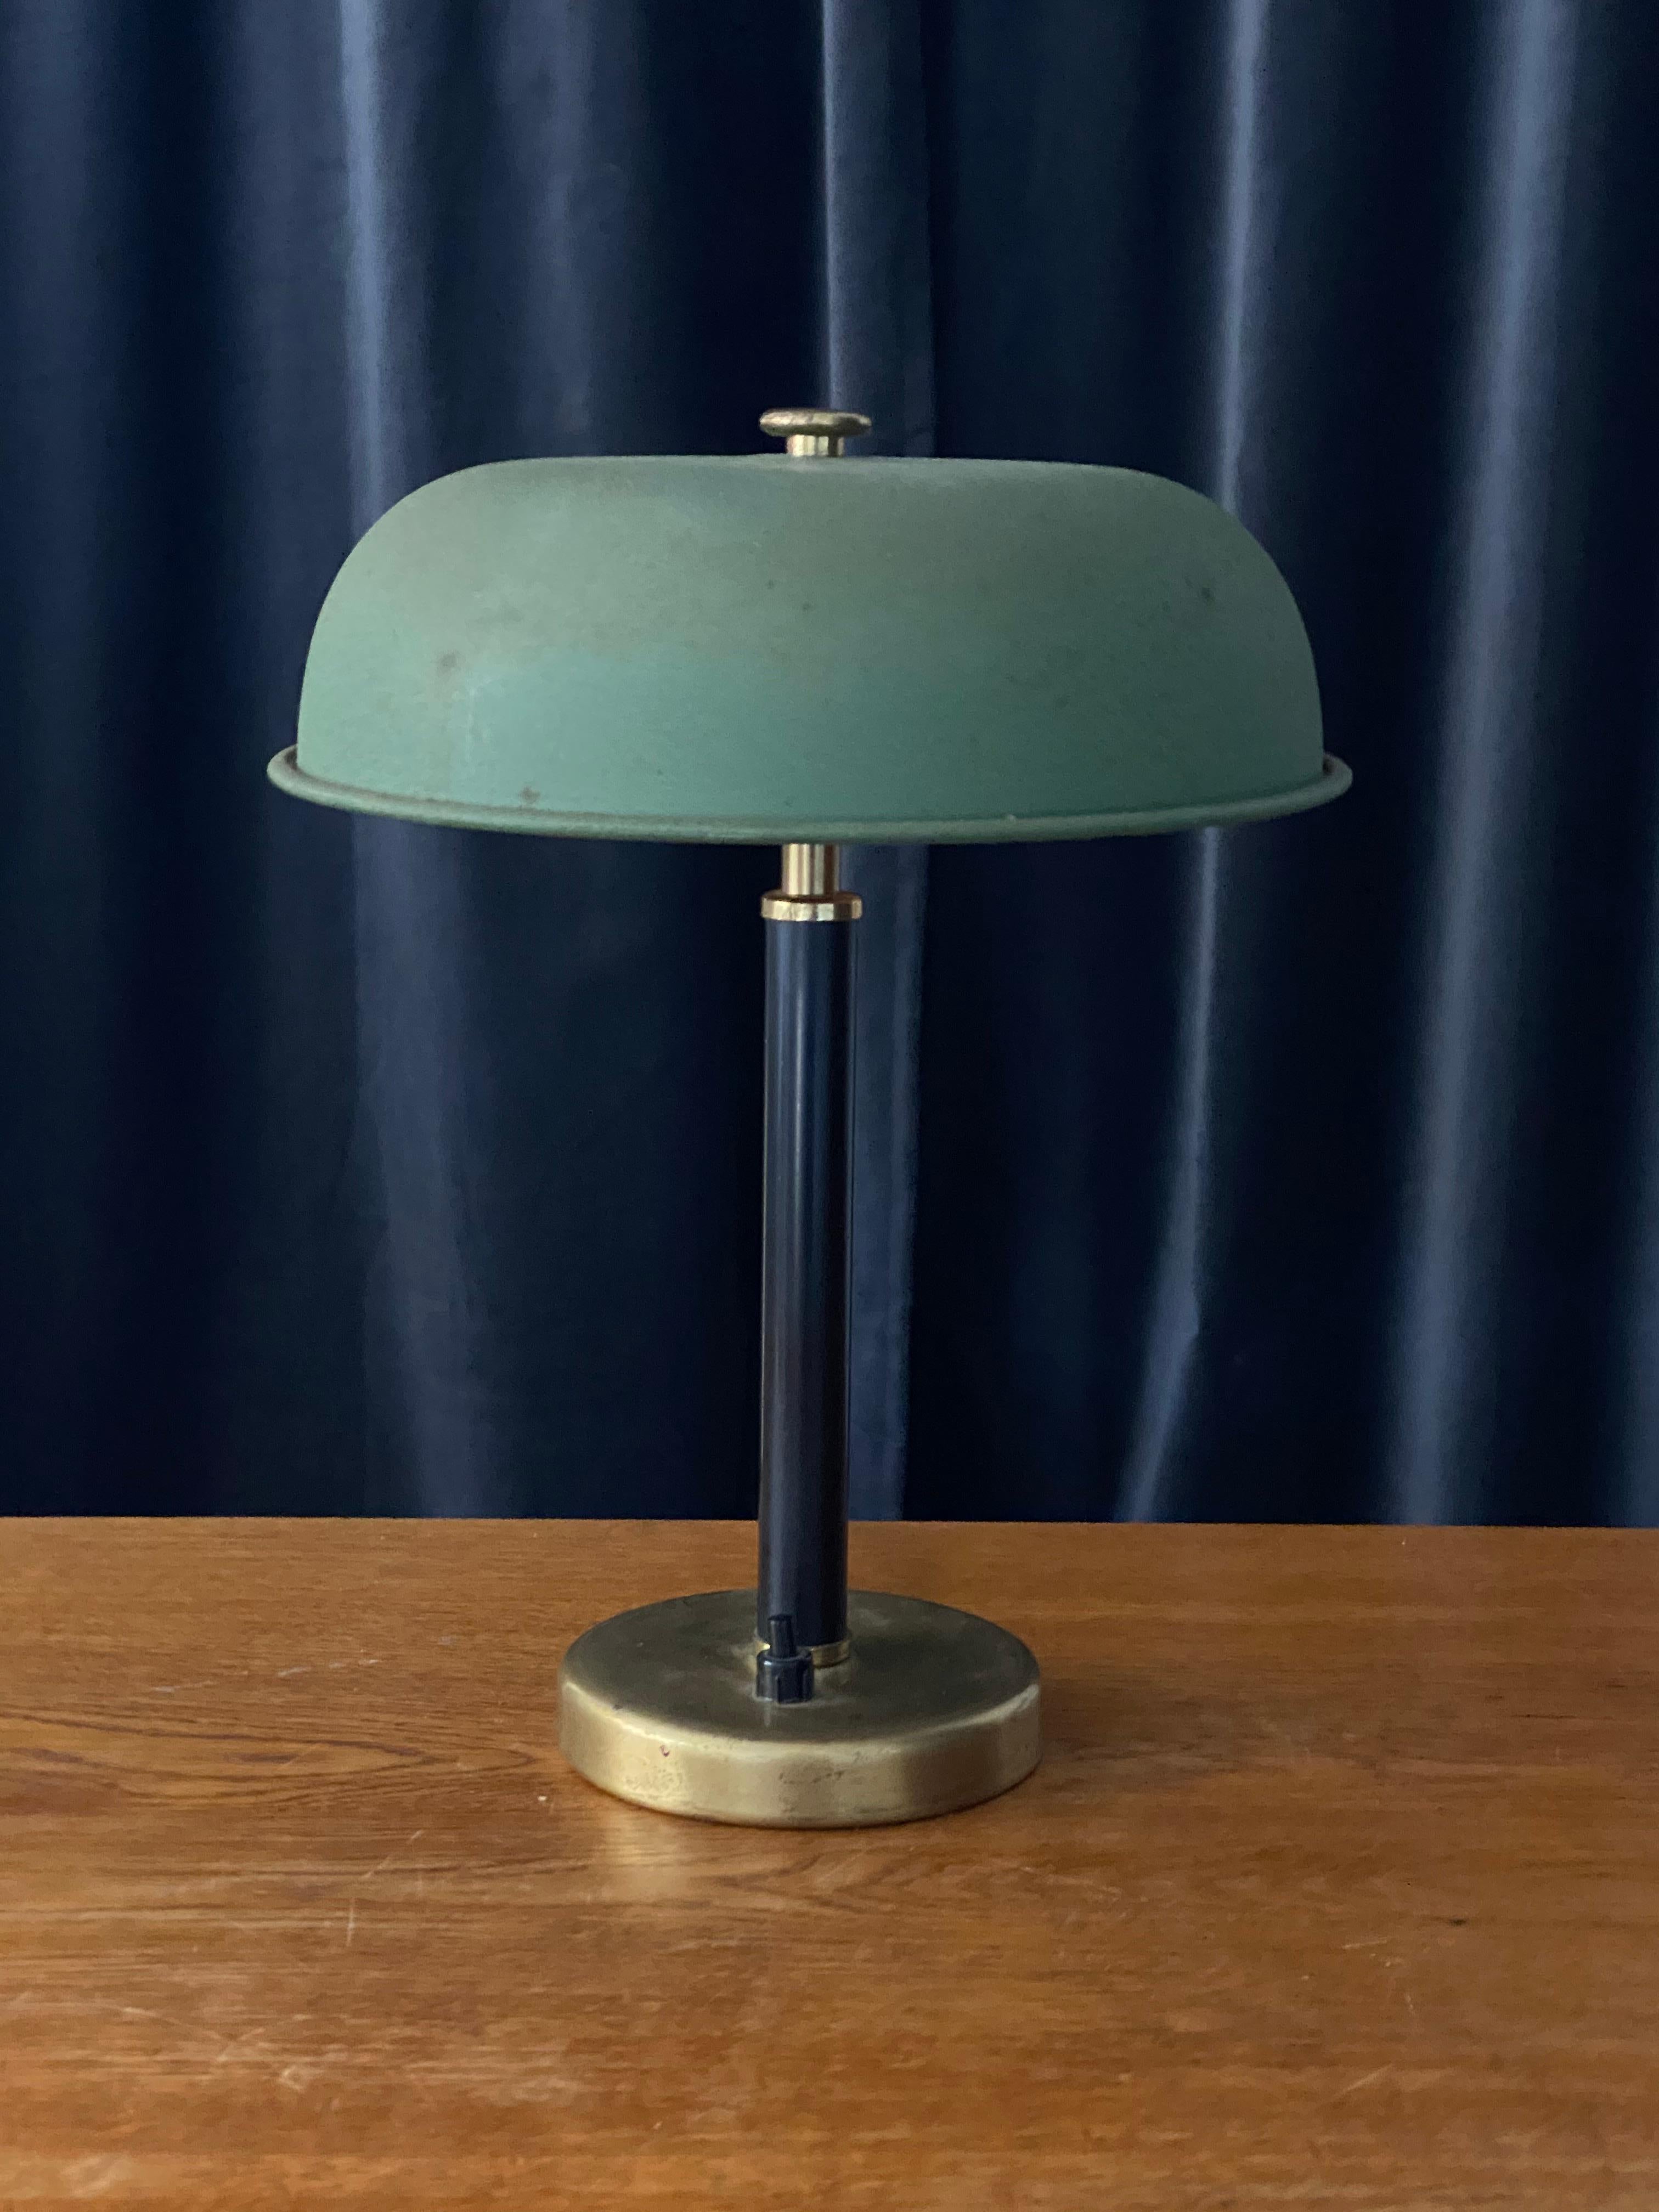 A small modernist table lamp. In brass and black painted wood, green lacquered metal. Produced in Sweden, late 1940s.

Other designers of the period include Paavo Tynell, Lisa Johansson-Pape, Carl-Axel Acking, and Gunnar Asplund.